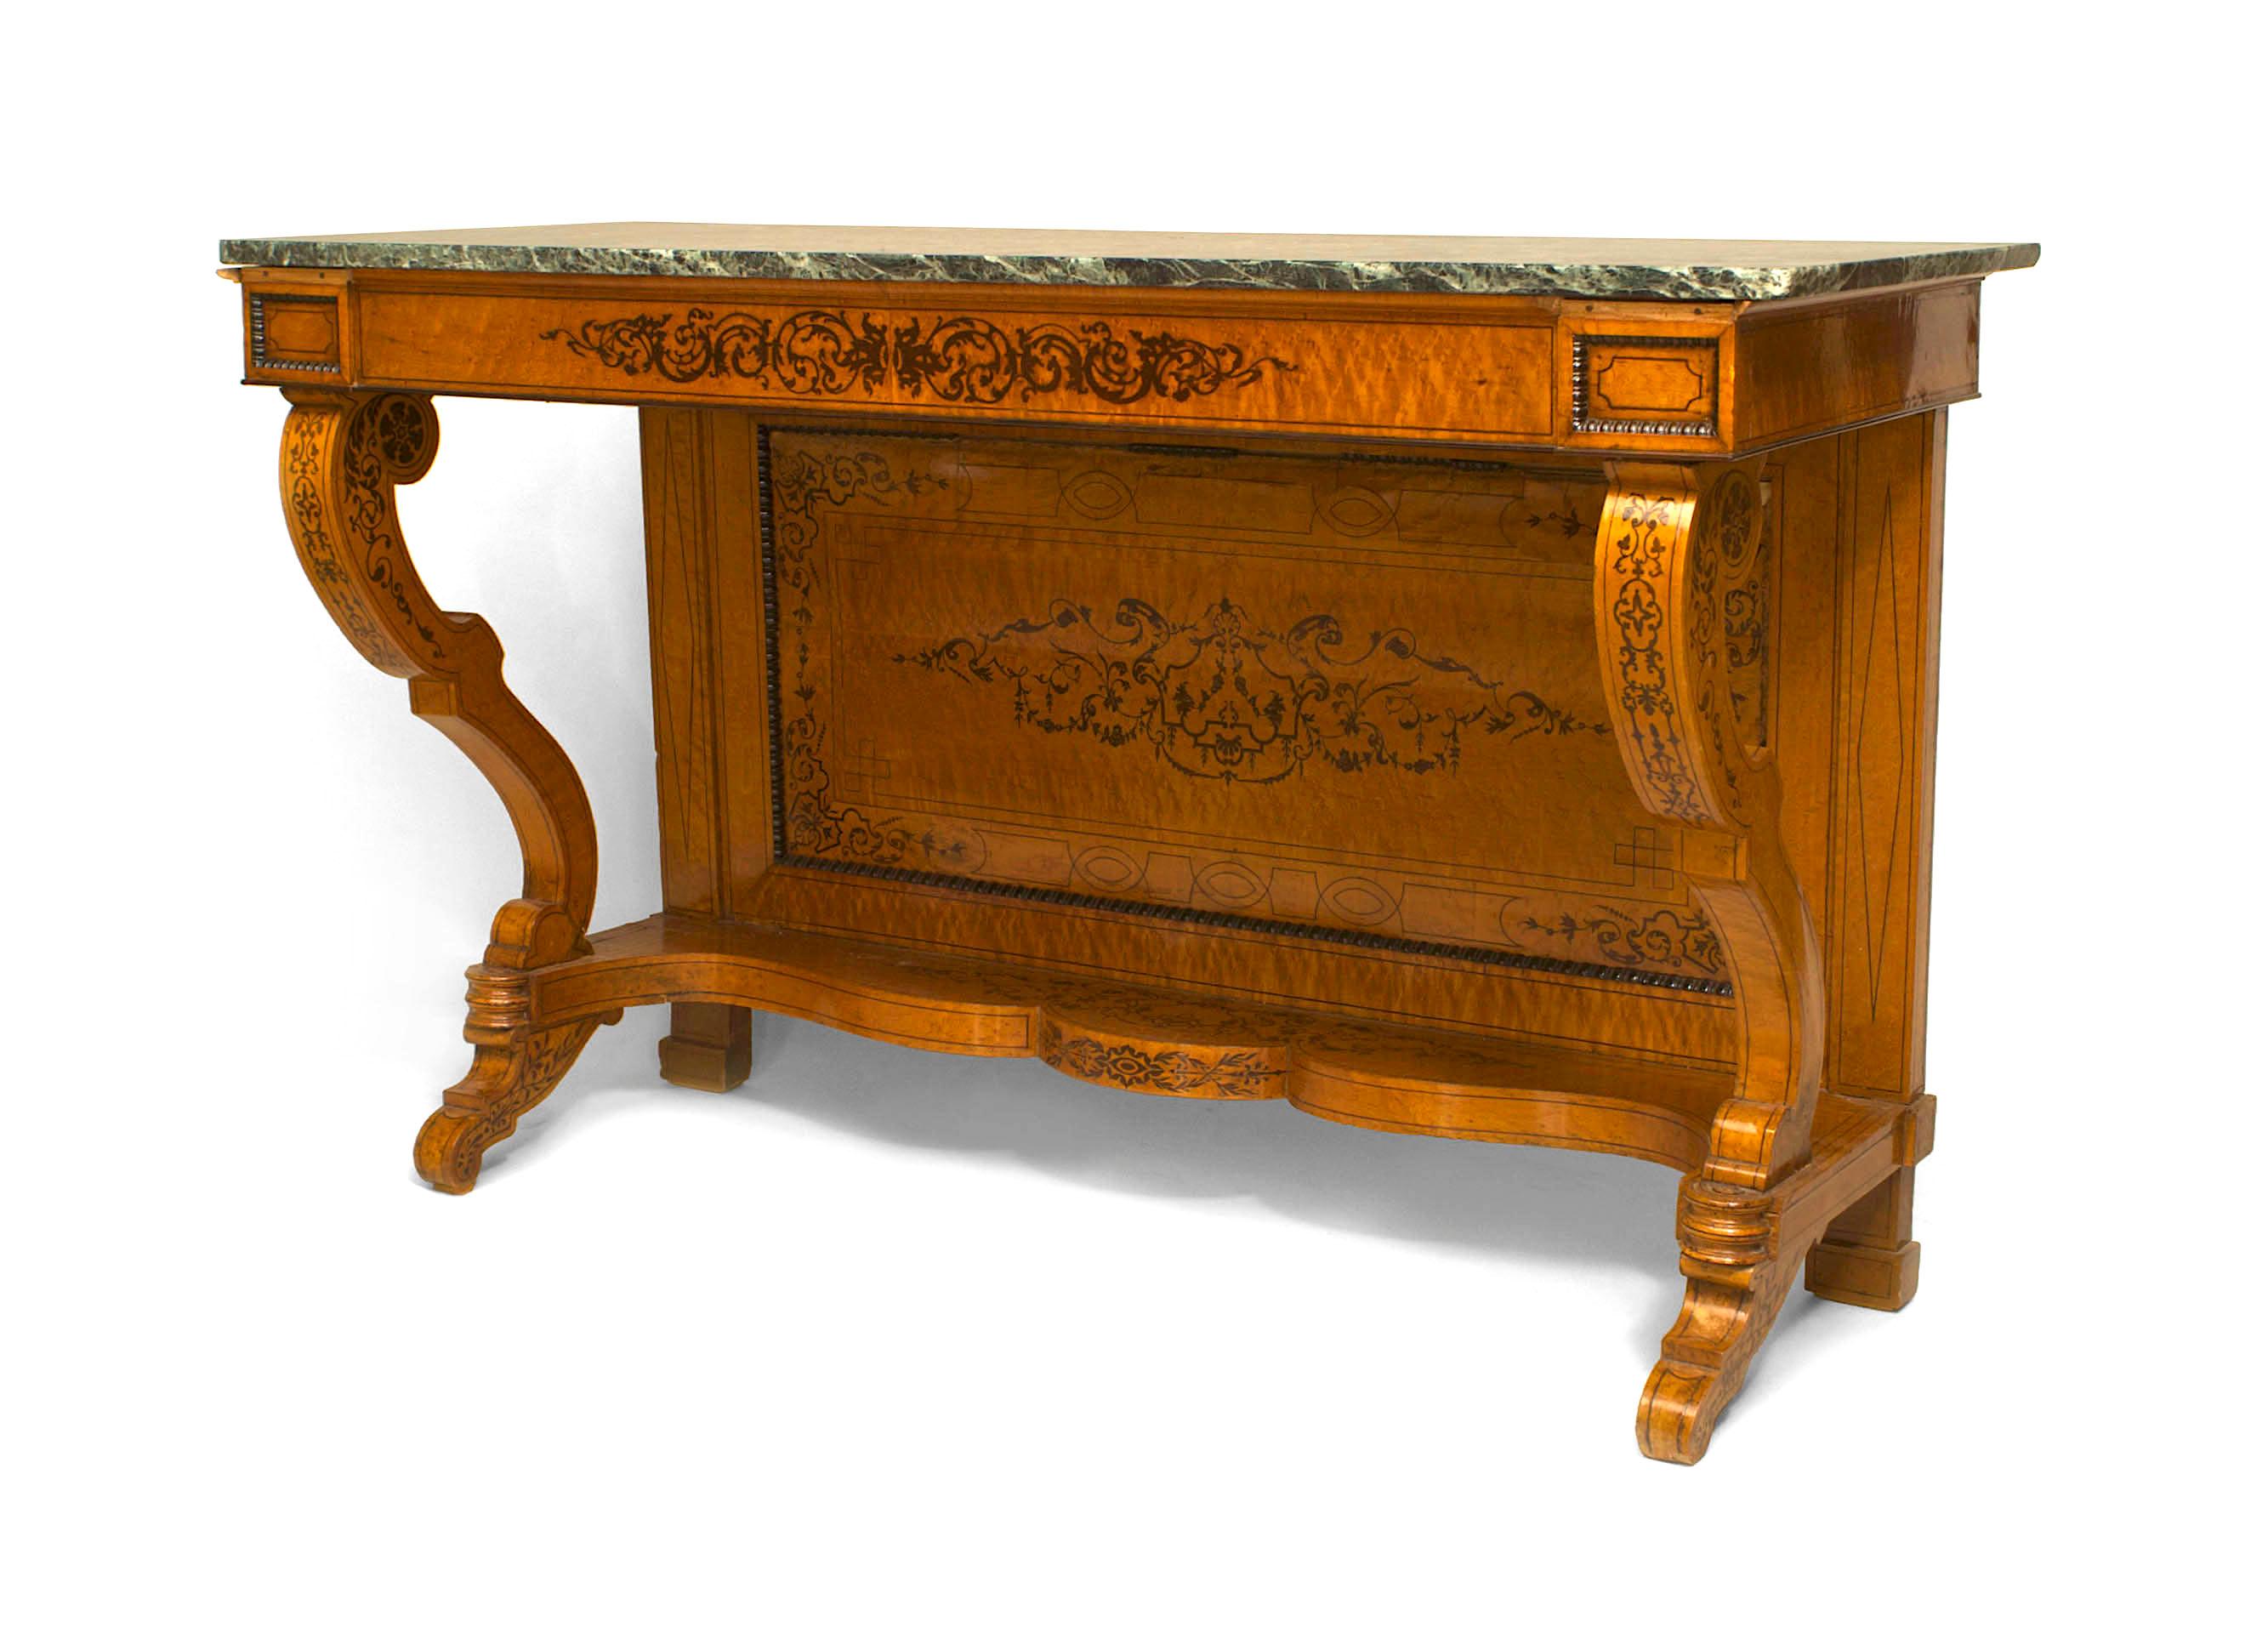 French Charles X bird's eye maple console table with amaranth marquetry inlaid back panel and trim with scroll sided and a platform base with a green marble top.
